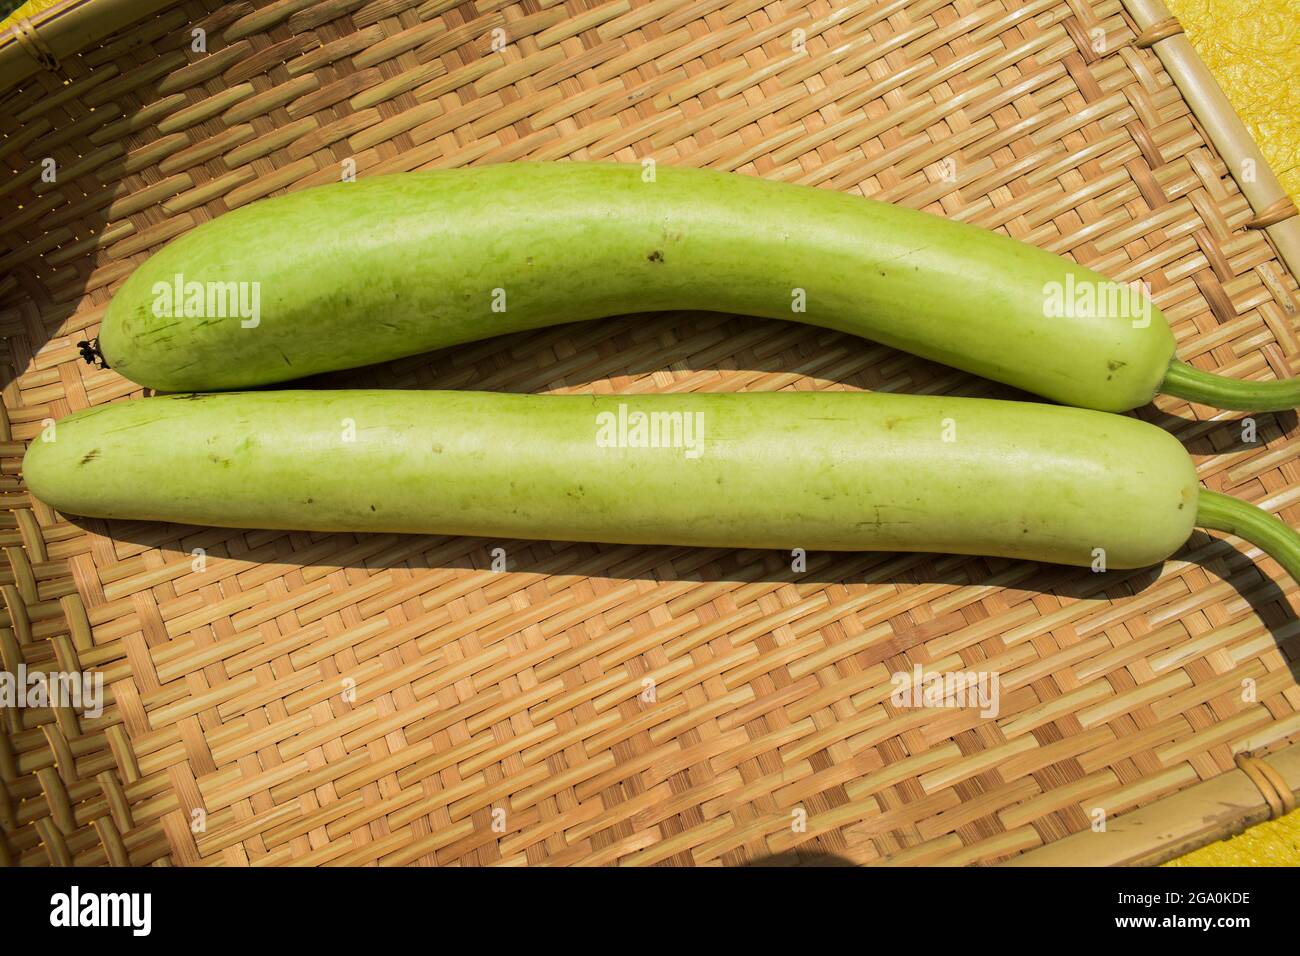 Bottlegourds or white-flower gourd also known as calabash are long and thin melons. indian asian vegetables in bamboo wicker basket background Stock Photo